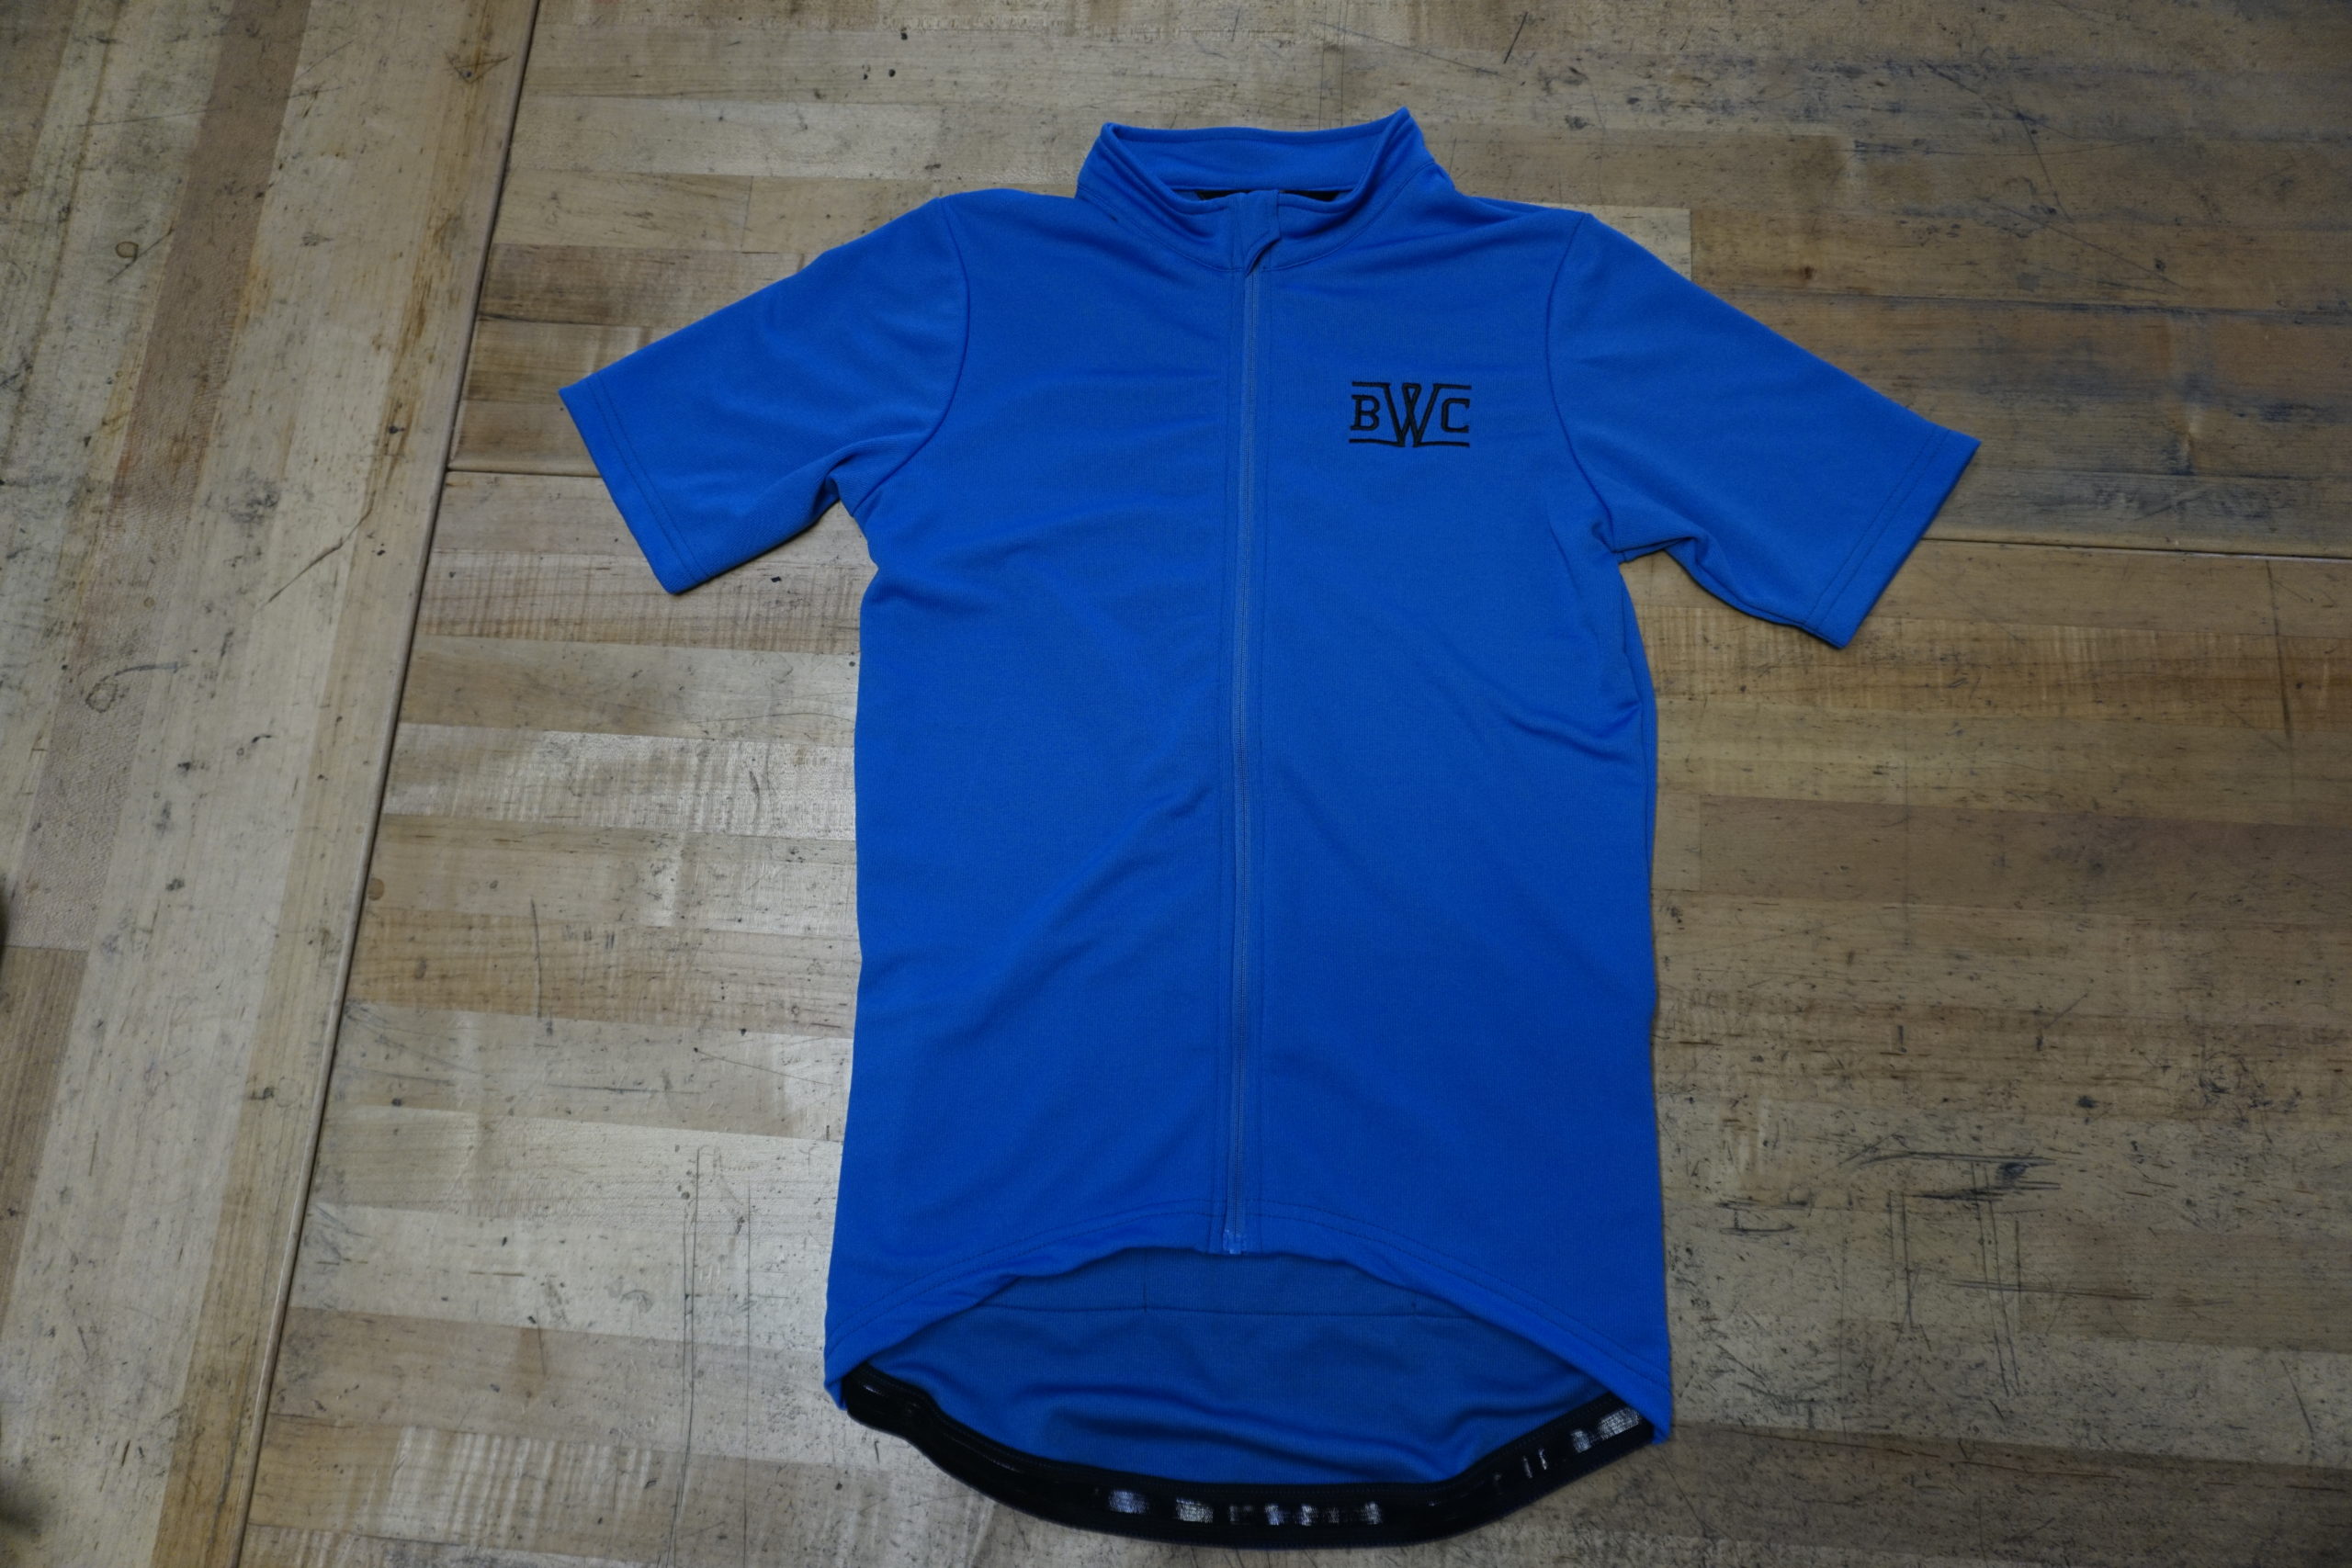 BWC Jersey by ANTHM Collective – Breadwinner Cycles